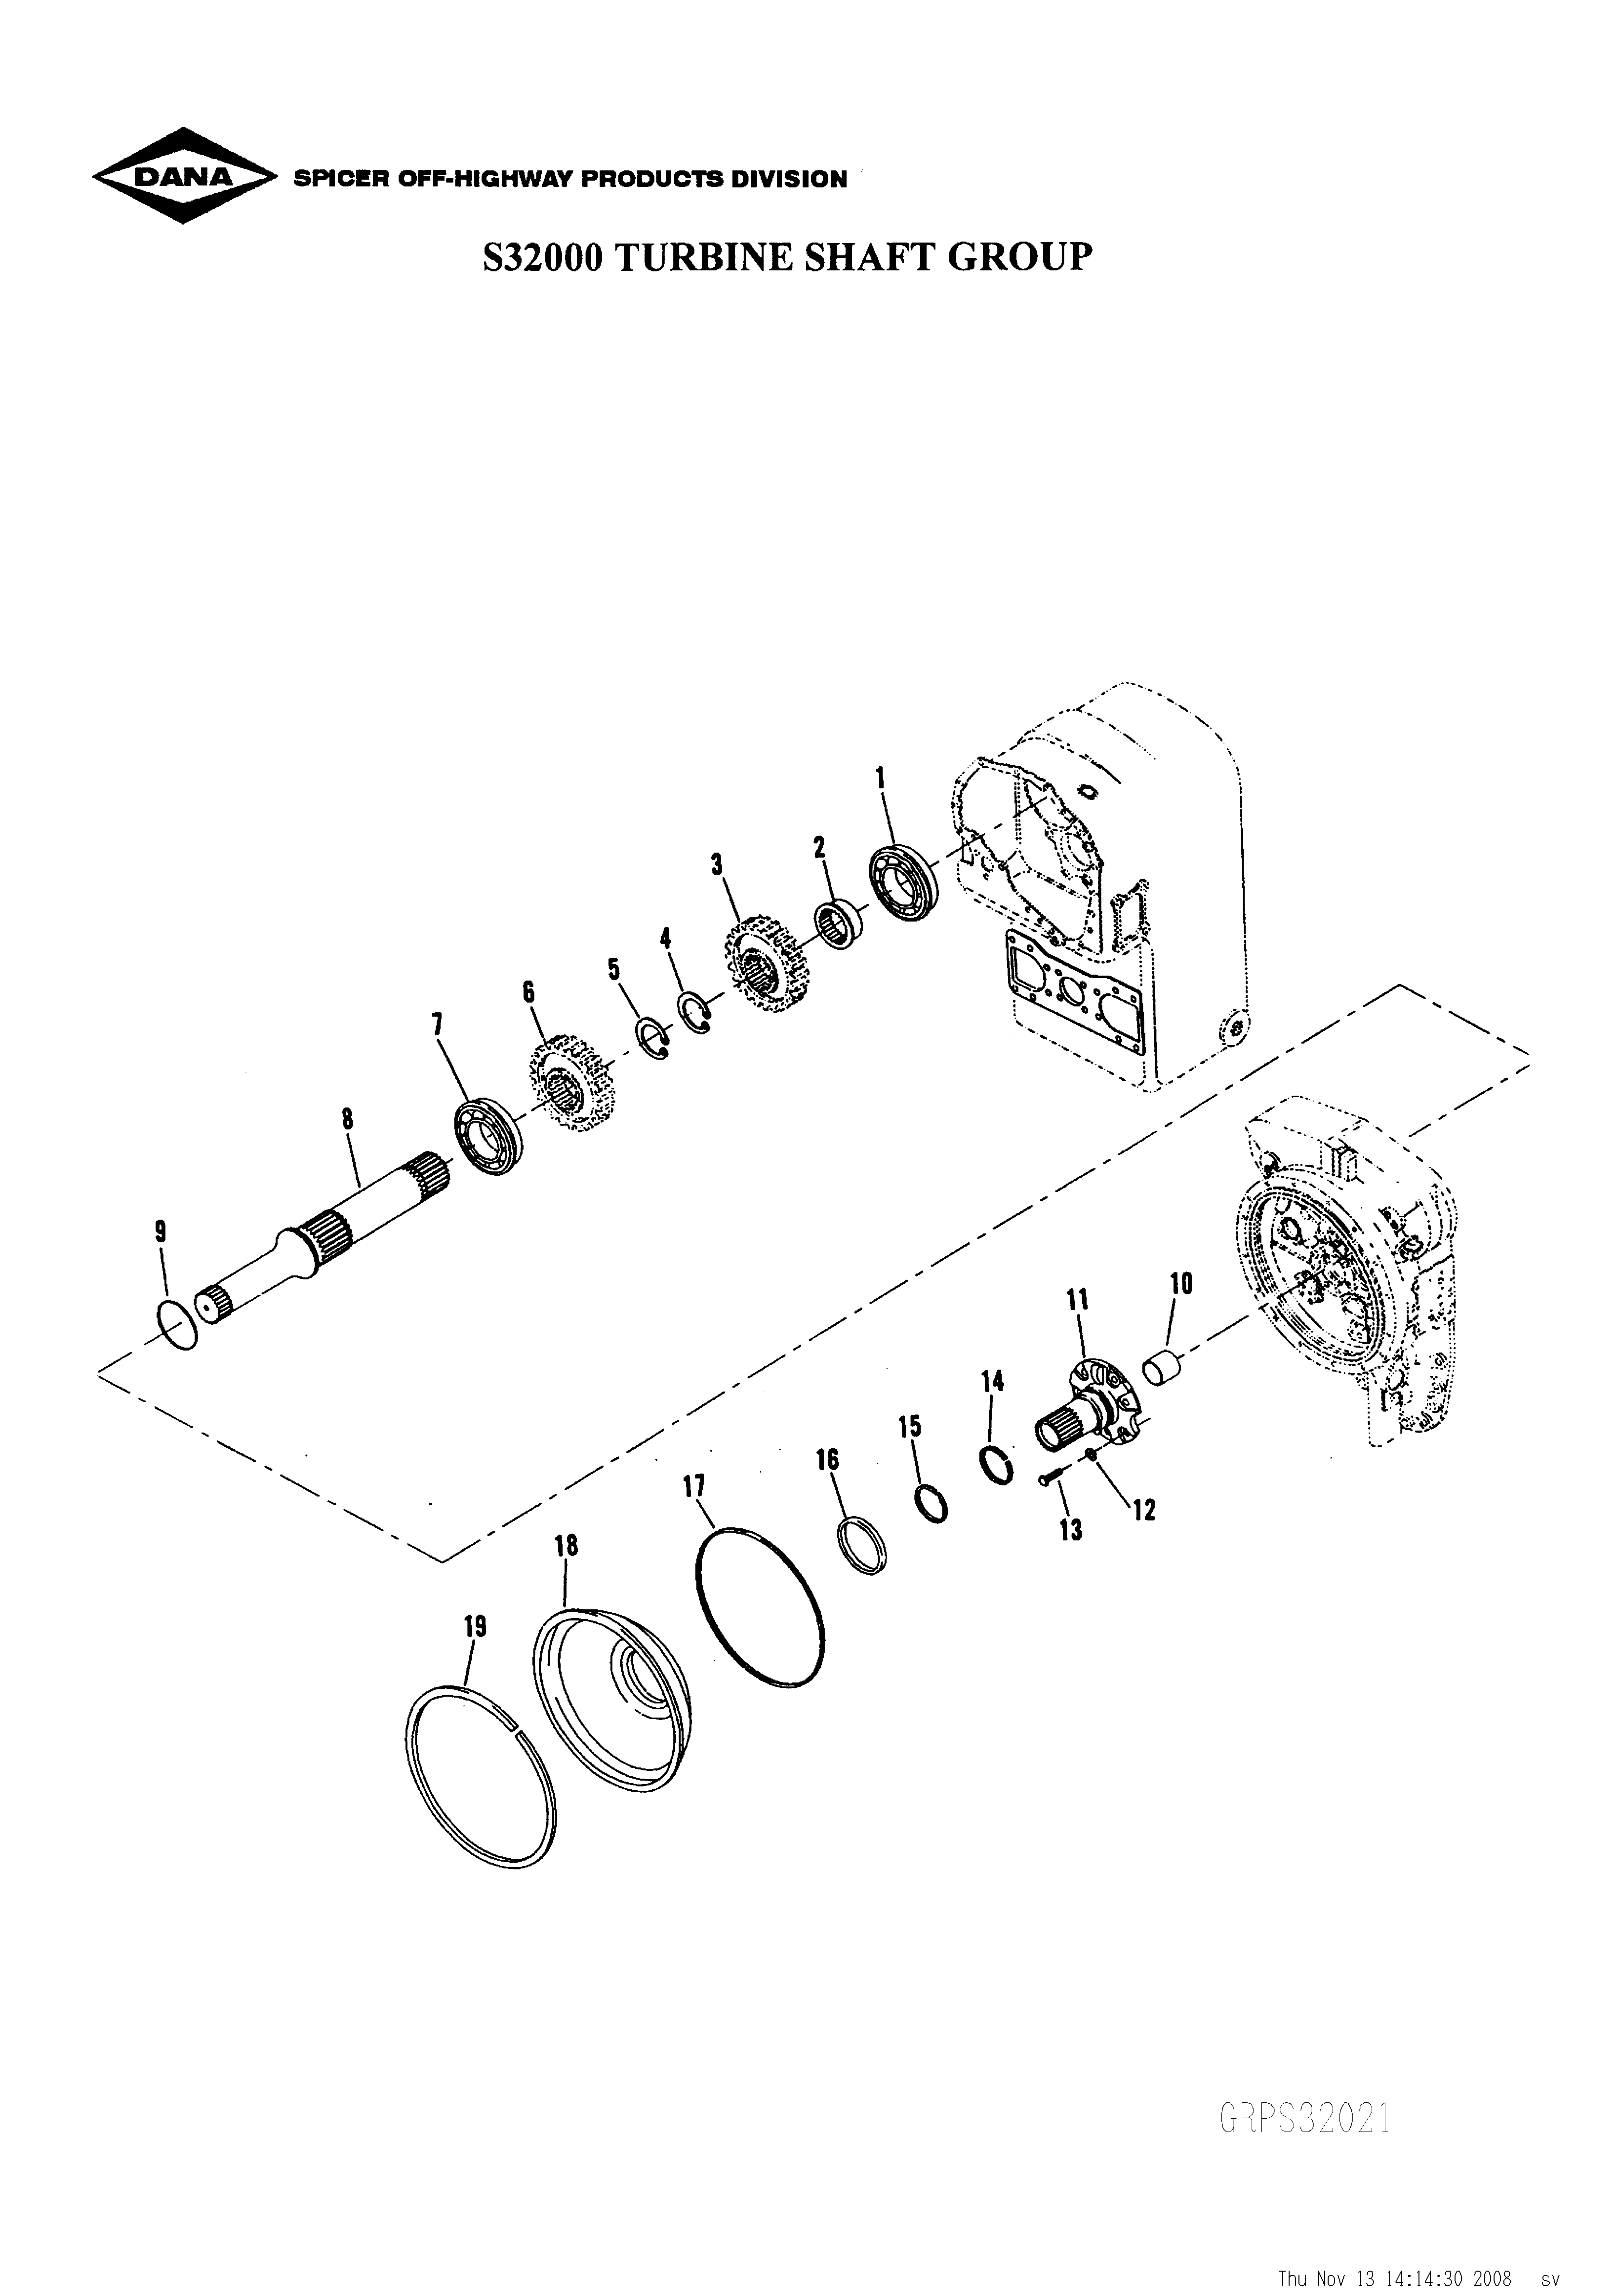 drawing for CNH NEW HOLLAND D80314 - SUPPORT (figure 4)